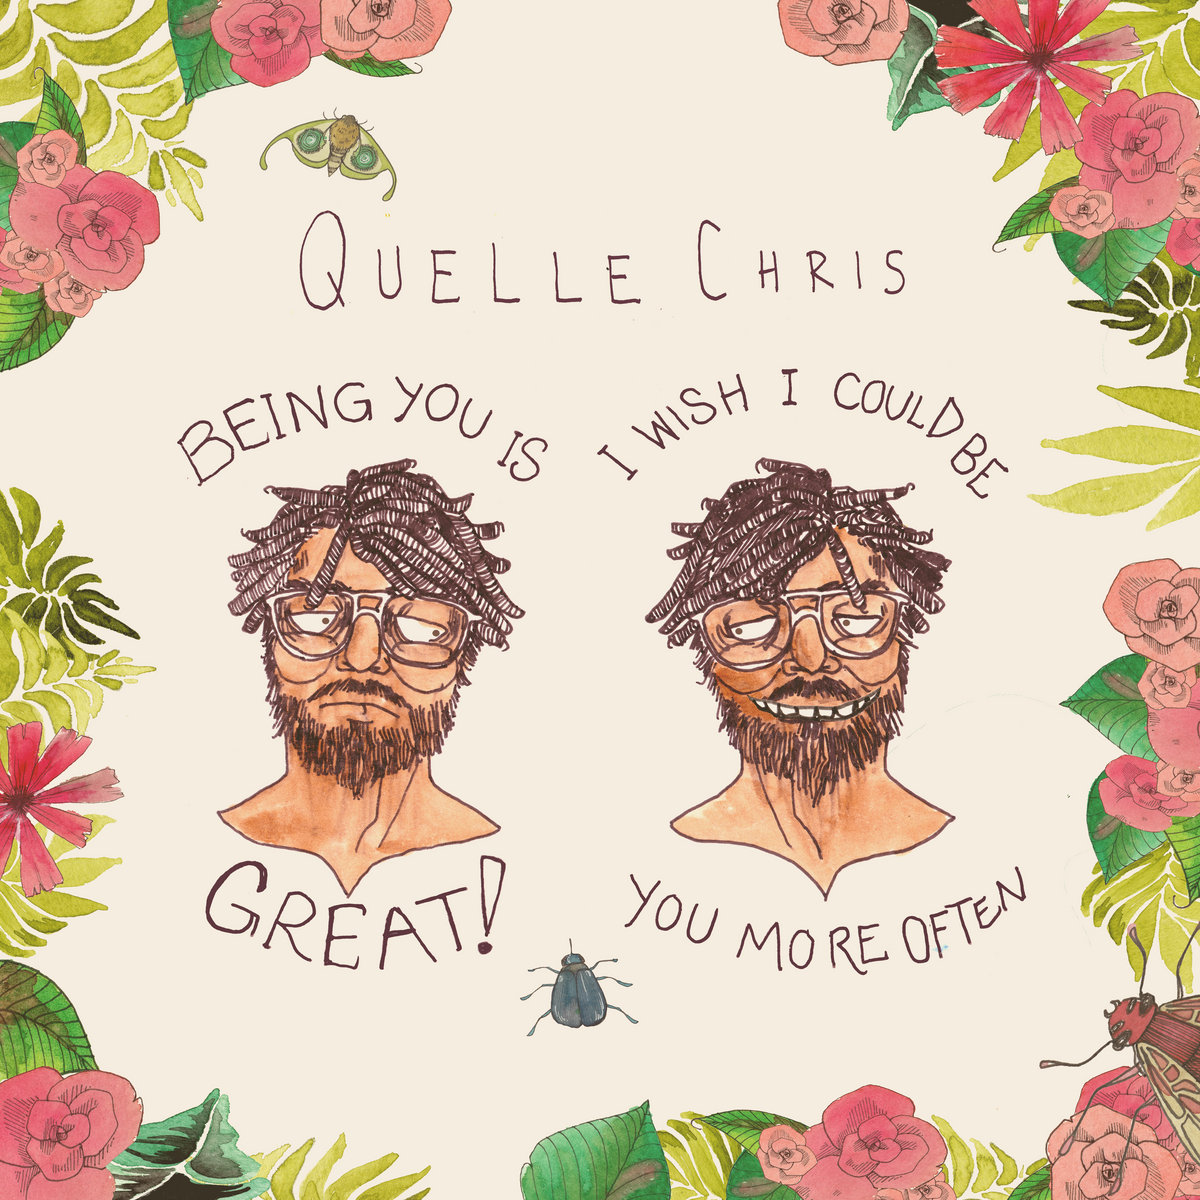 Quelle Chris Being You Is Great, I Wish I Could Be You More Often cover artwork